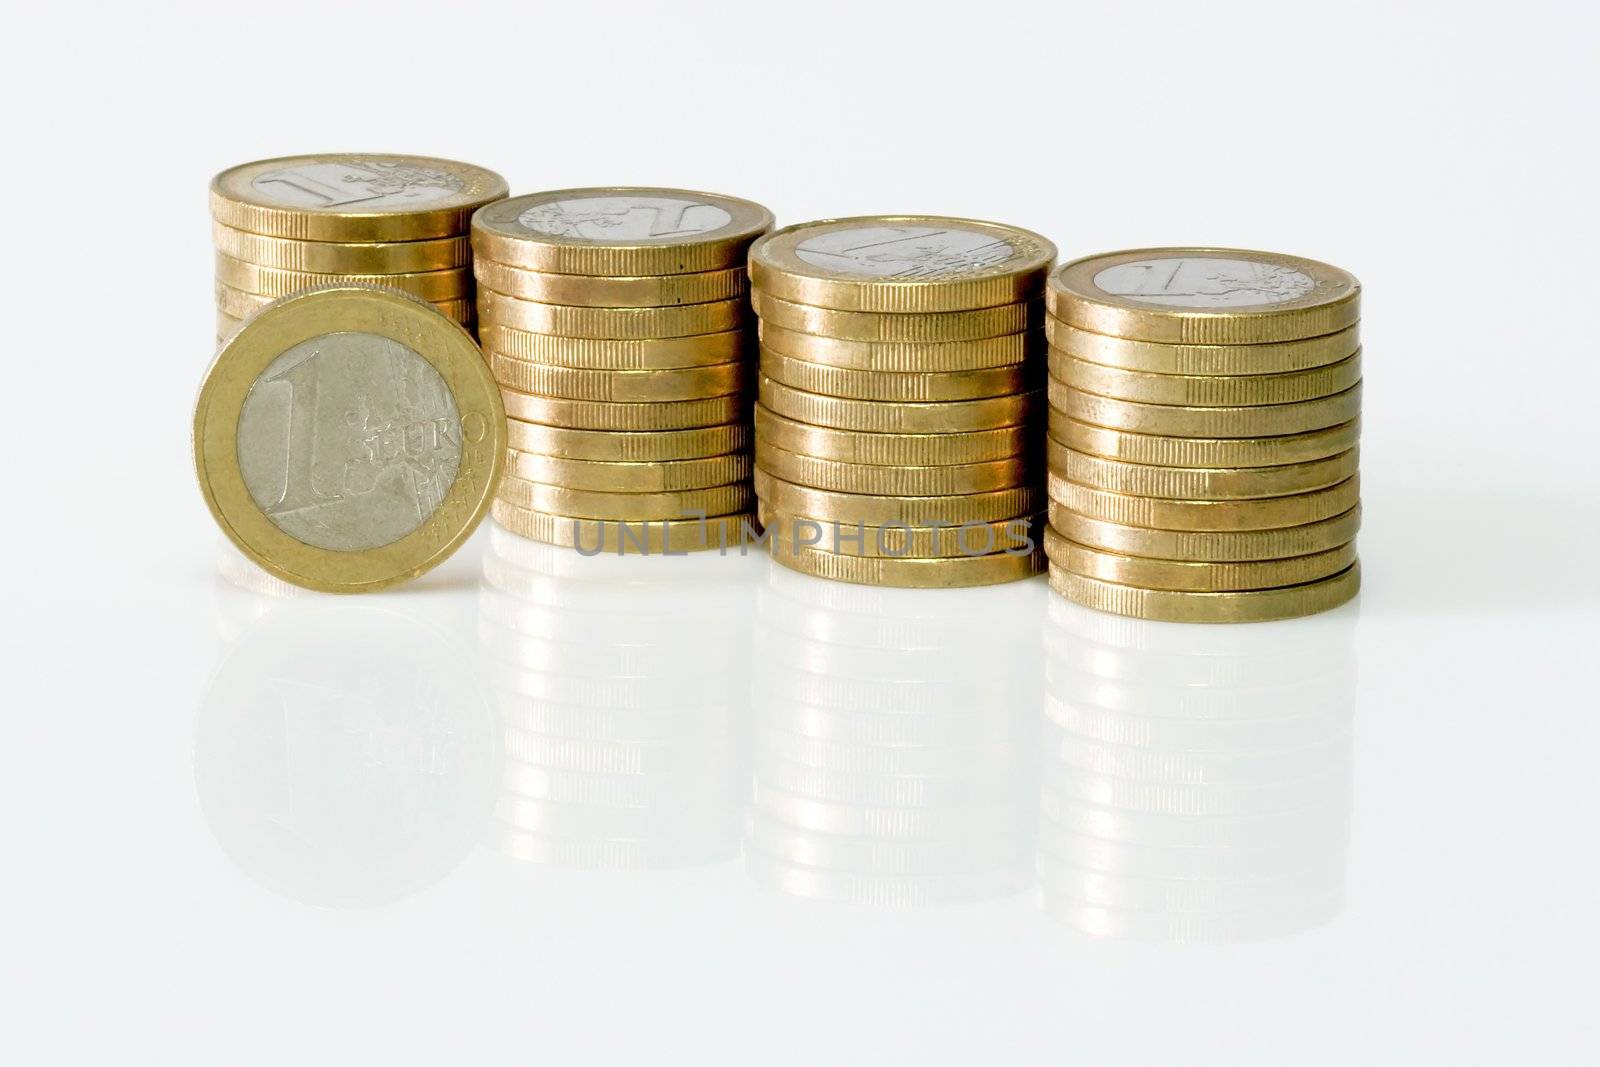 Stacks of Euro coins on light background